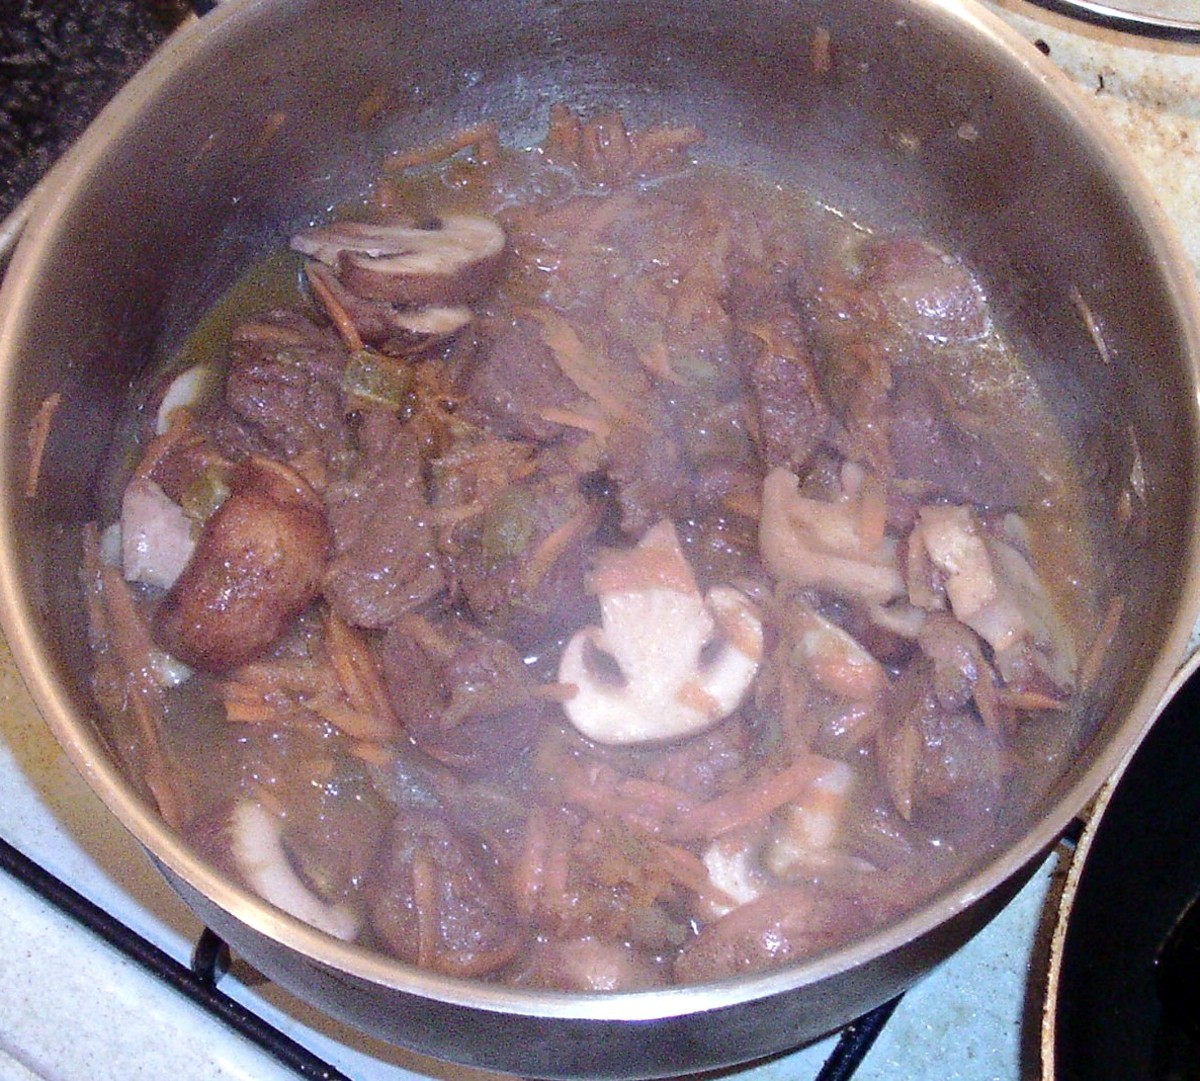 Stir carrot and mushrooms into stew